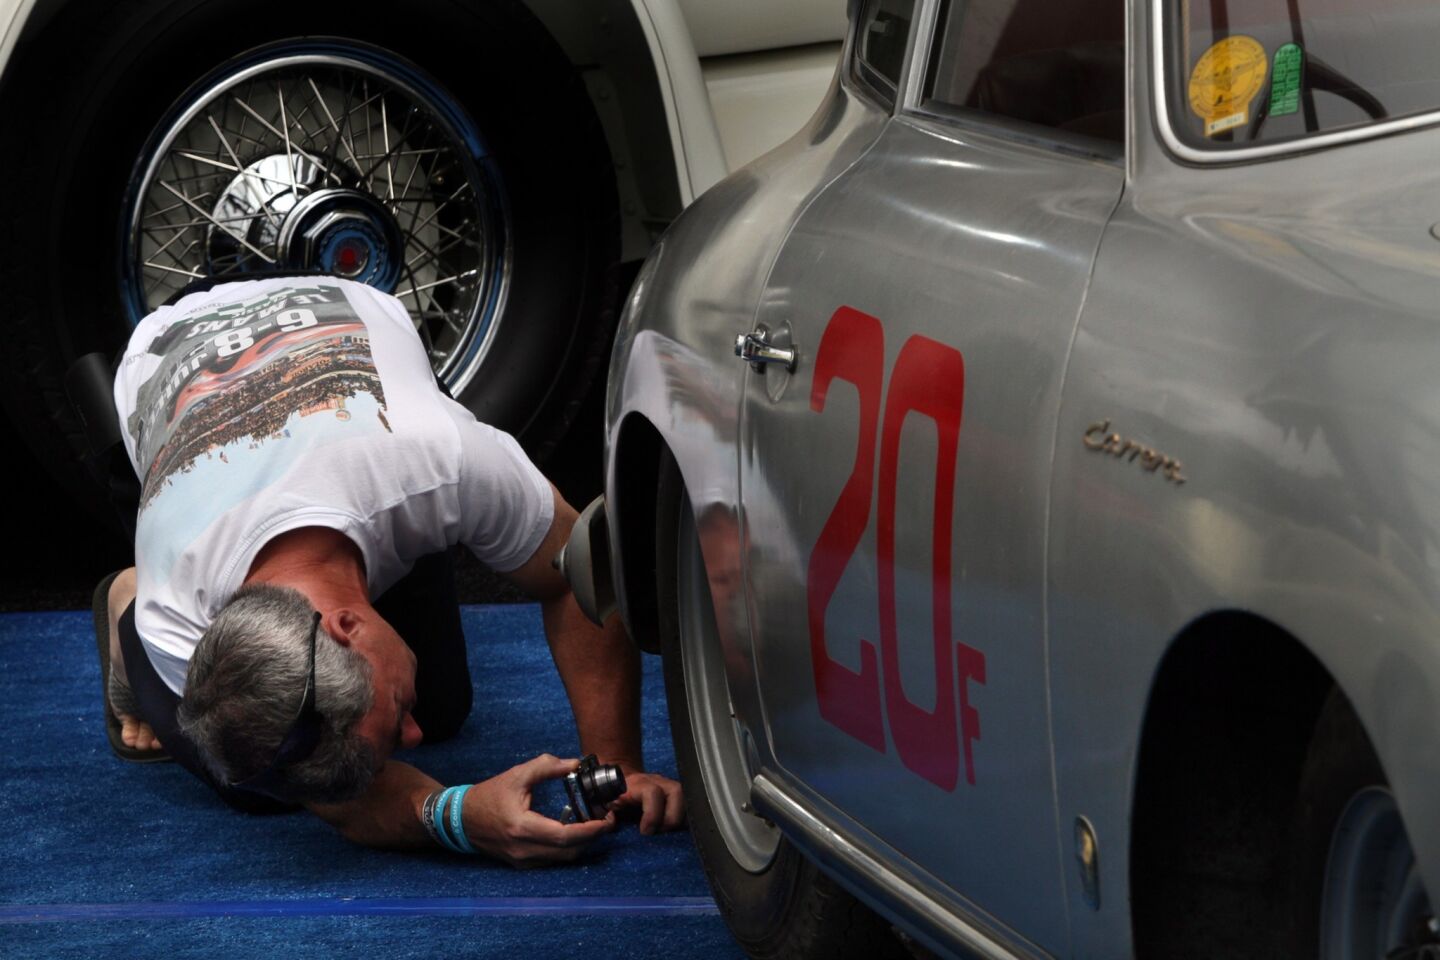 A man uses a camera to get a closer look at the undercarriage of a 1956 Porsche 356 A 1500 GS Carrera Coupe.